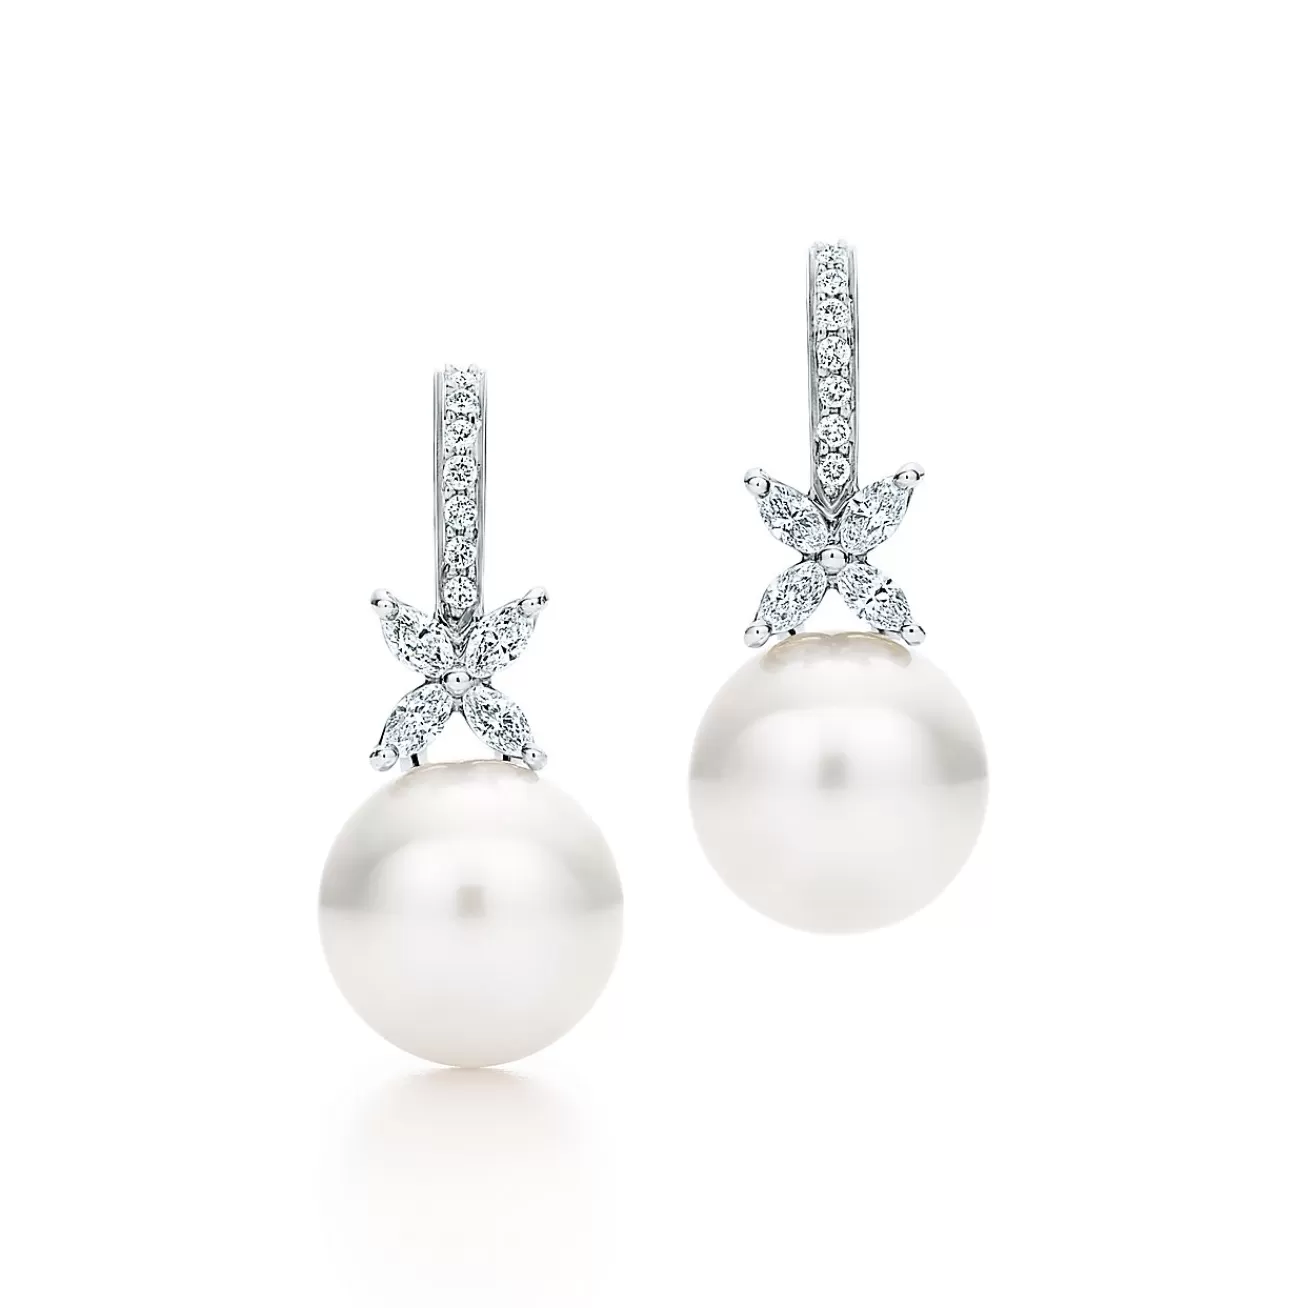 Tiffany & Co. Tiffany Victoria® earrings in platinum with South Sea pearls and diamonds. | ^ Earrings | Platinum Jewelry